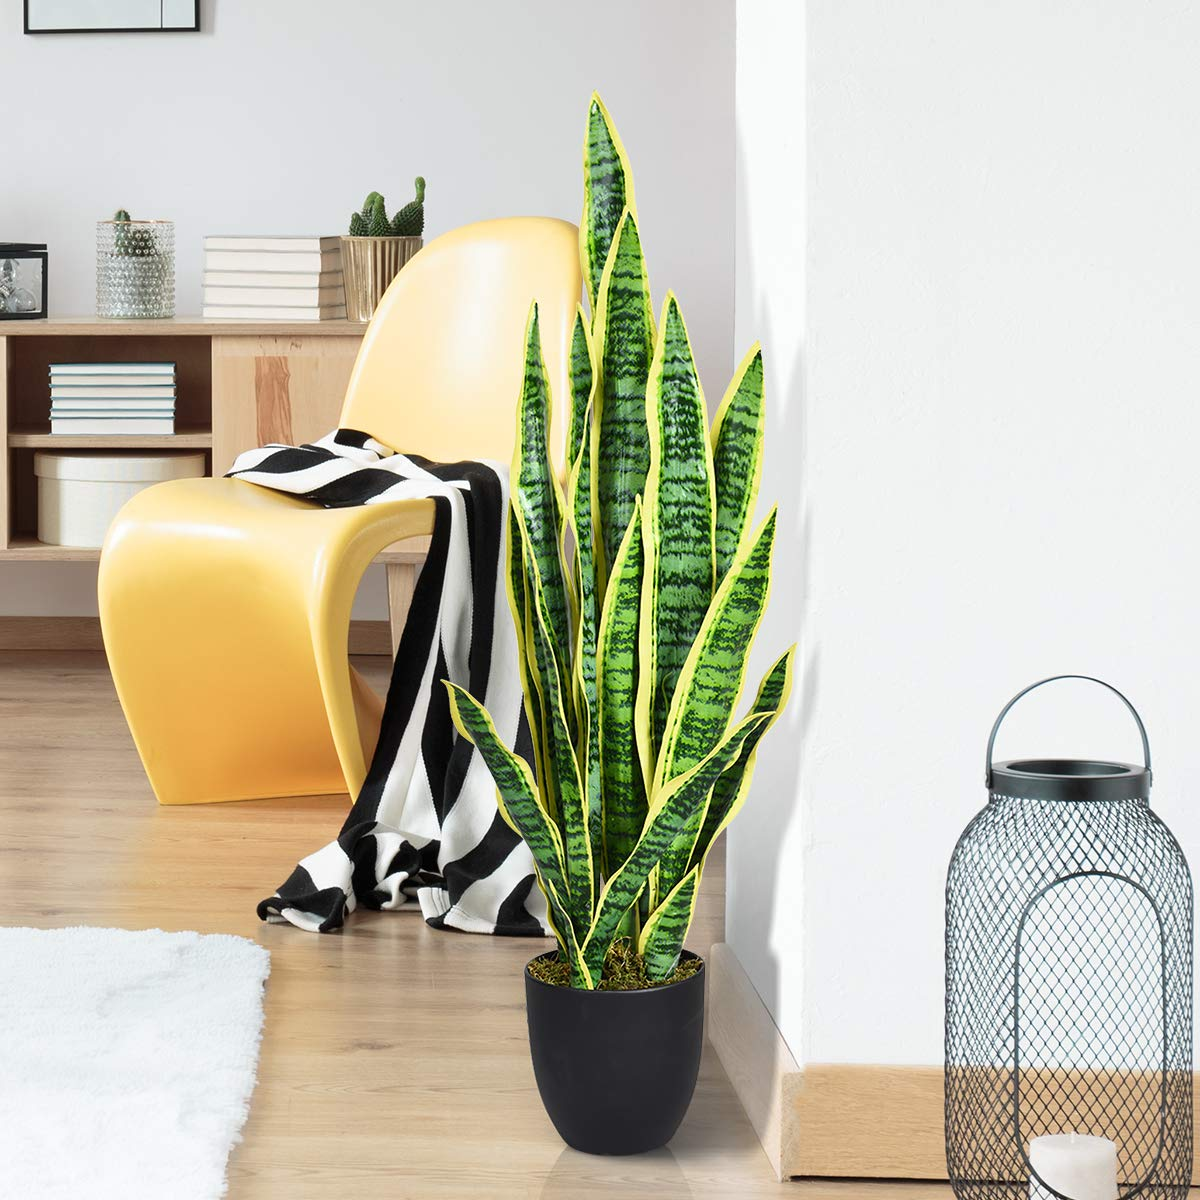 Green and yellow leaves of a snake plant brightening up a white living space